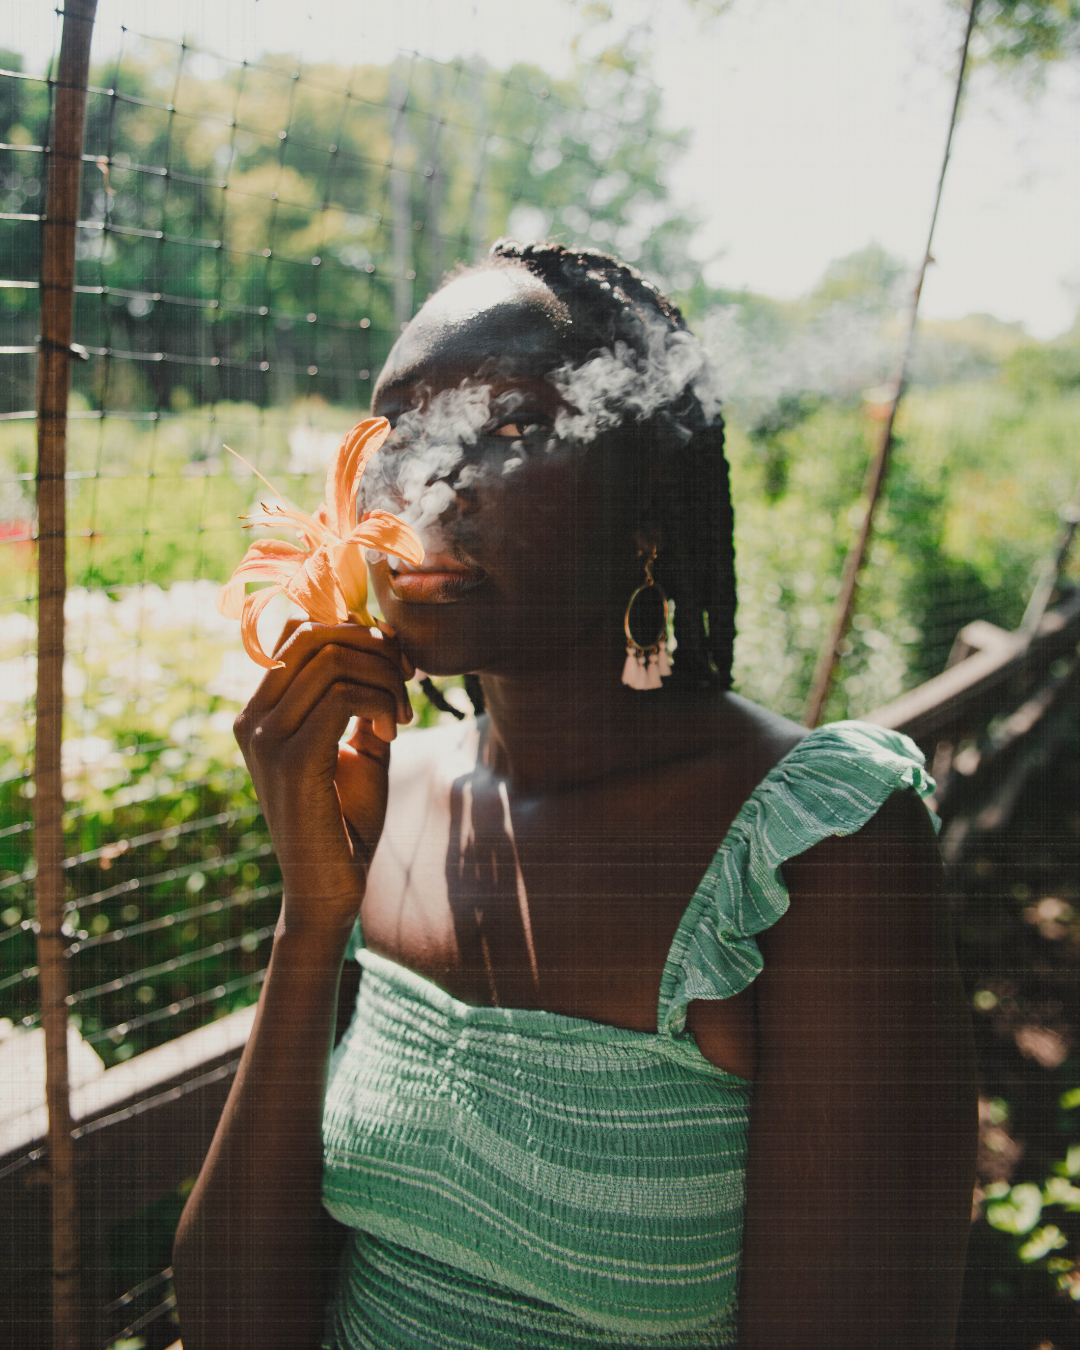 Photo of a Black woman in a green top exhaling smoke from and holding an orange flower near her mouth.